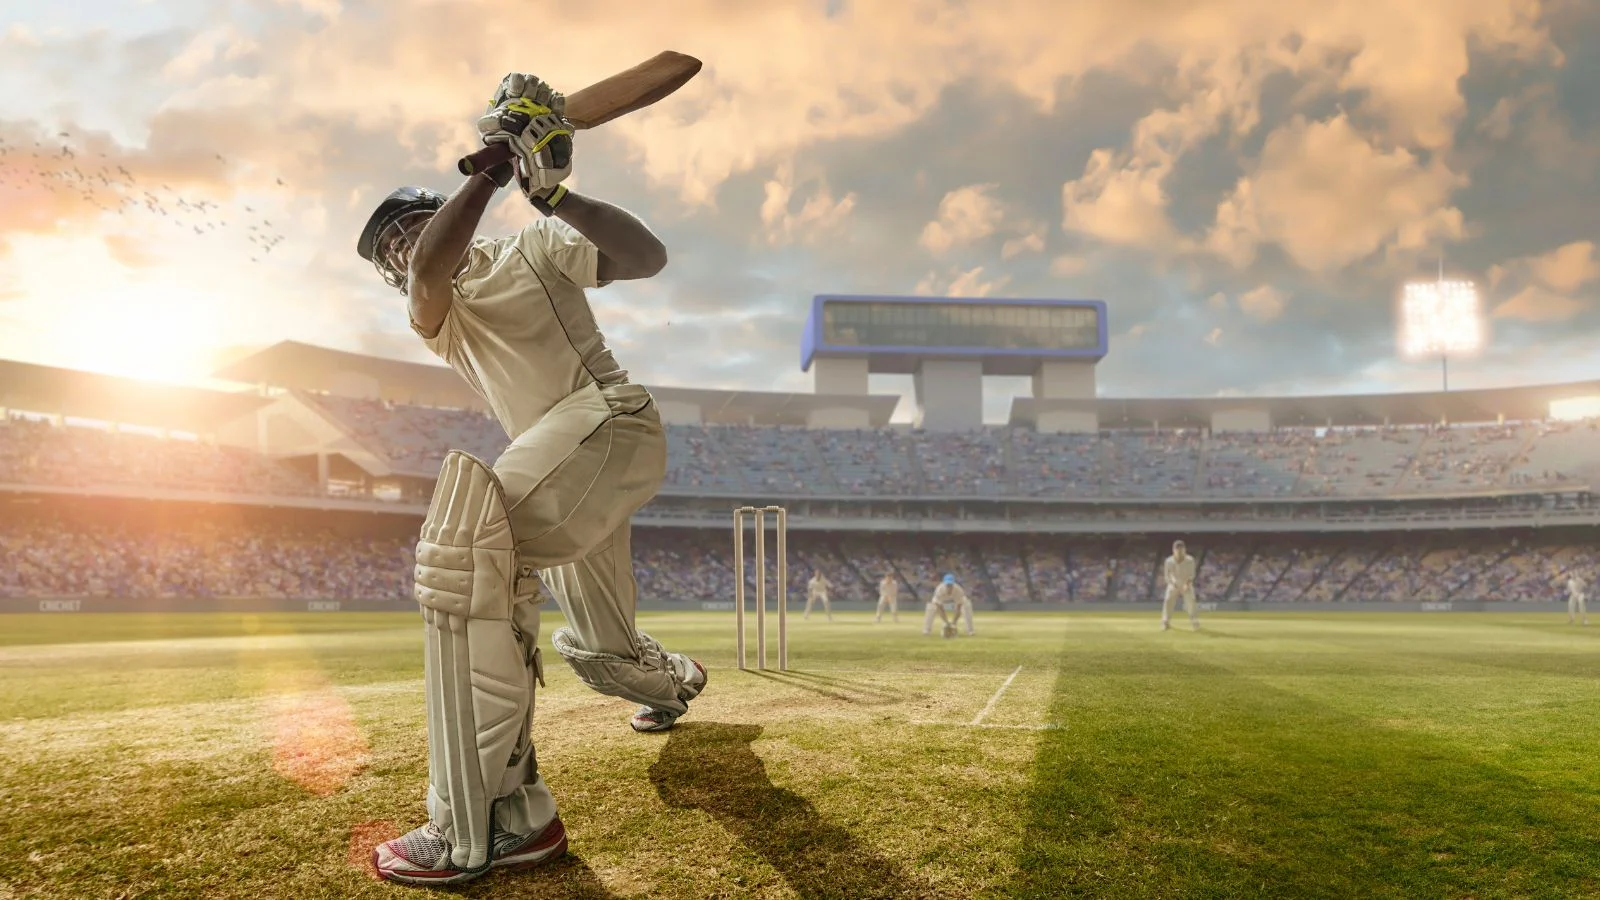 How to Bet on Cricket